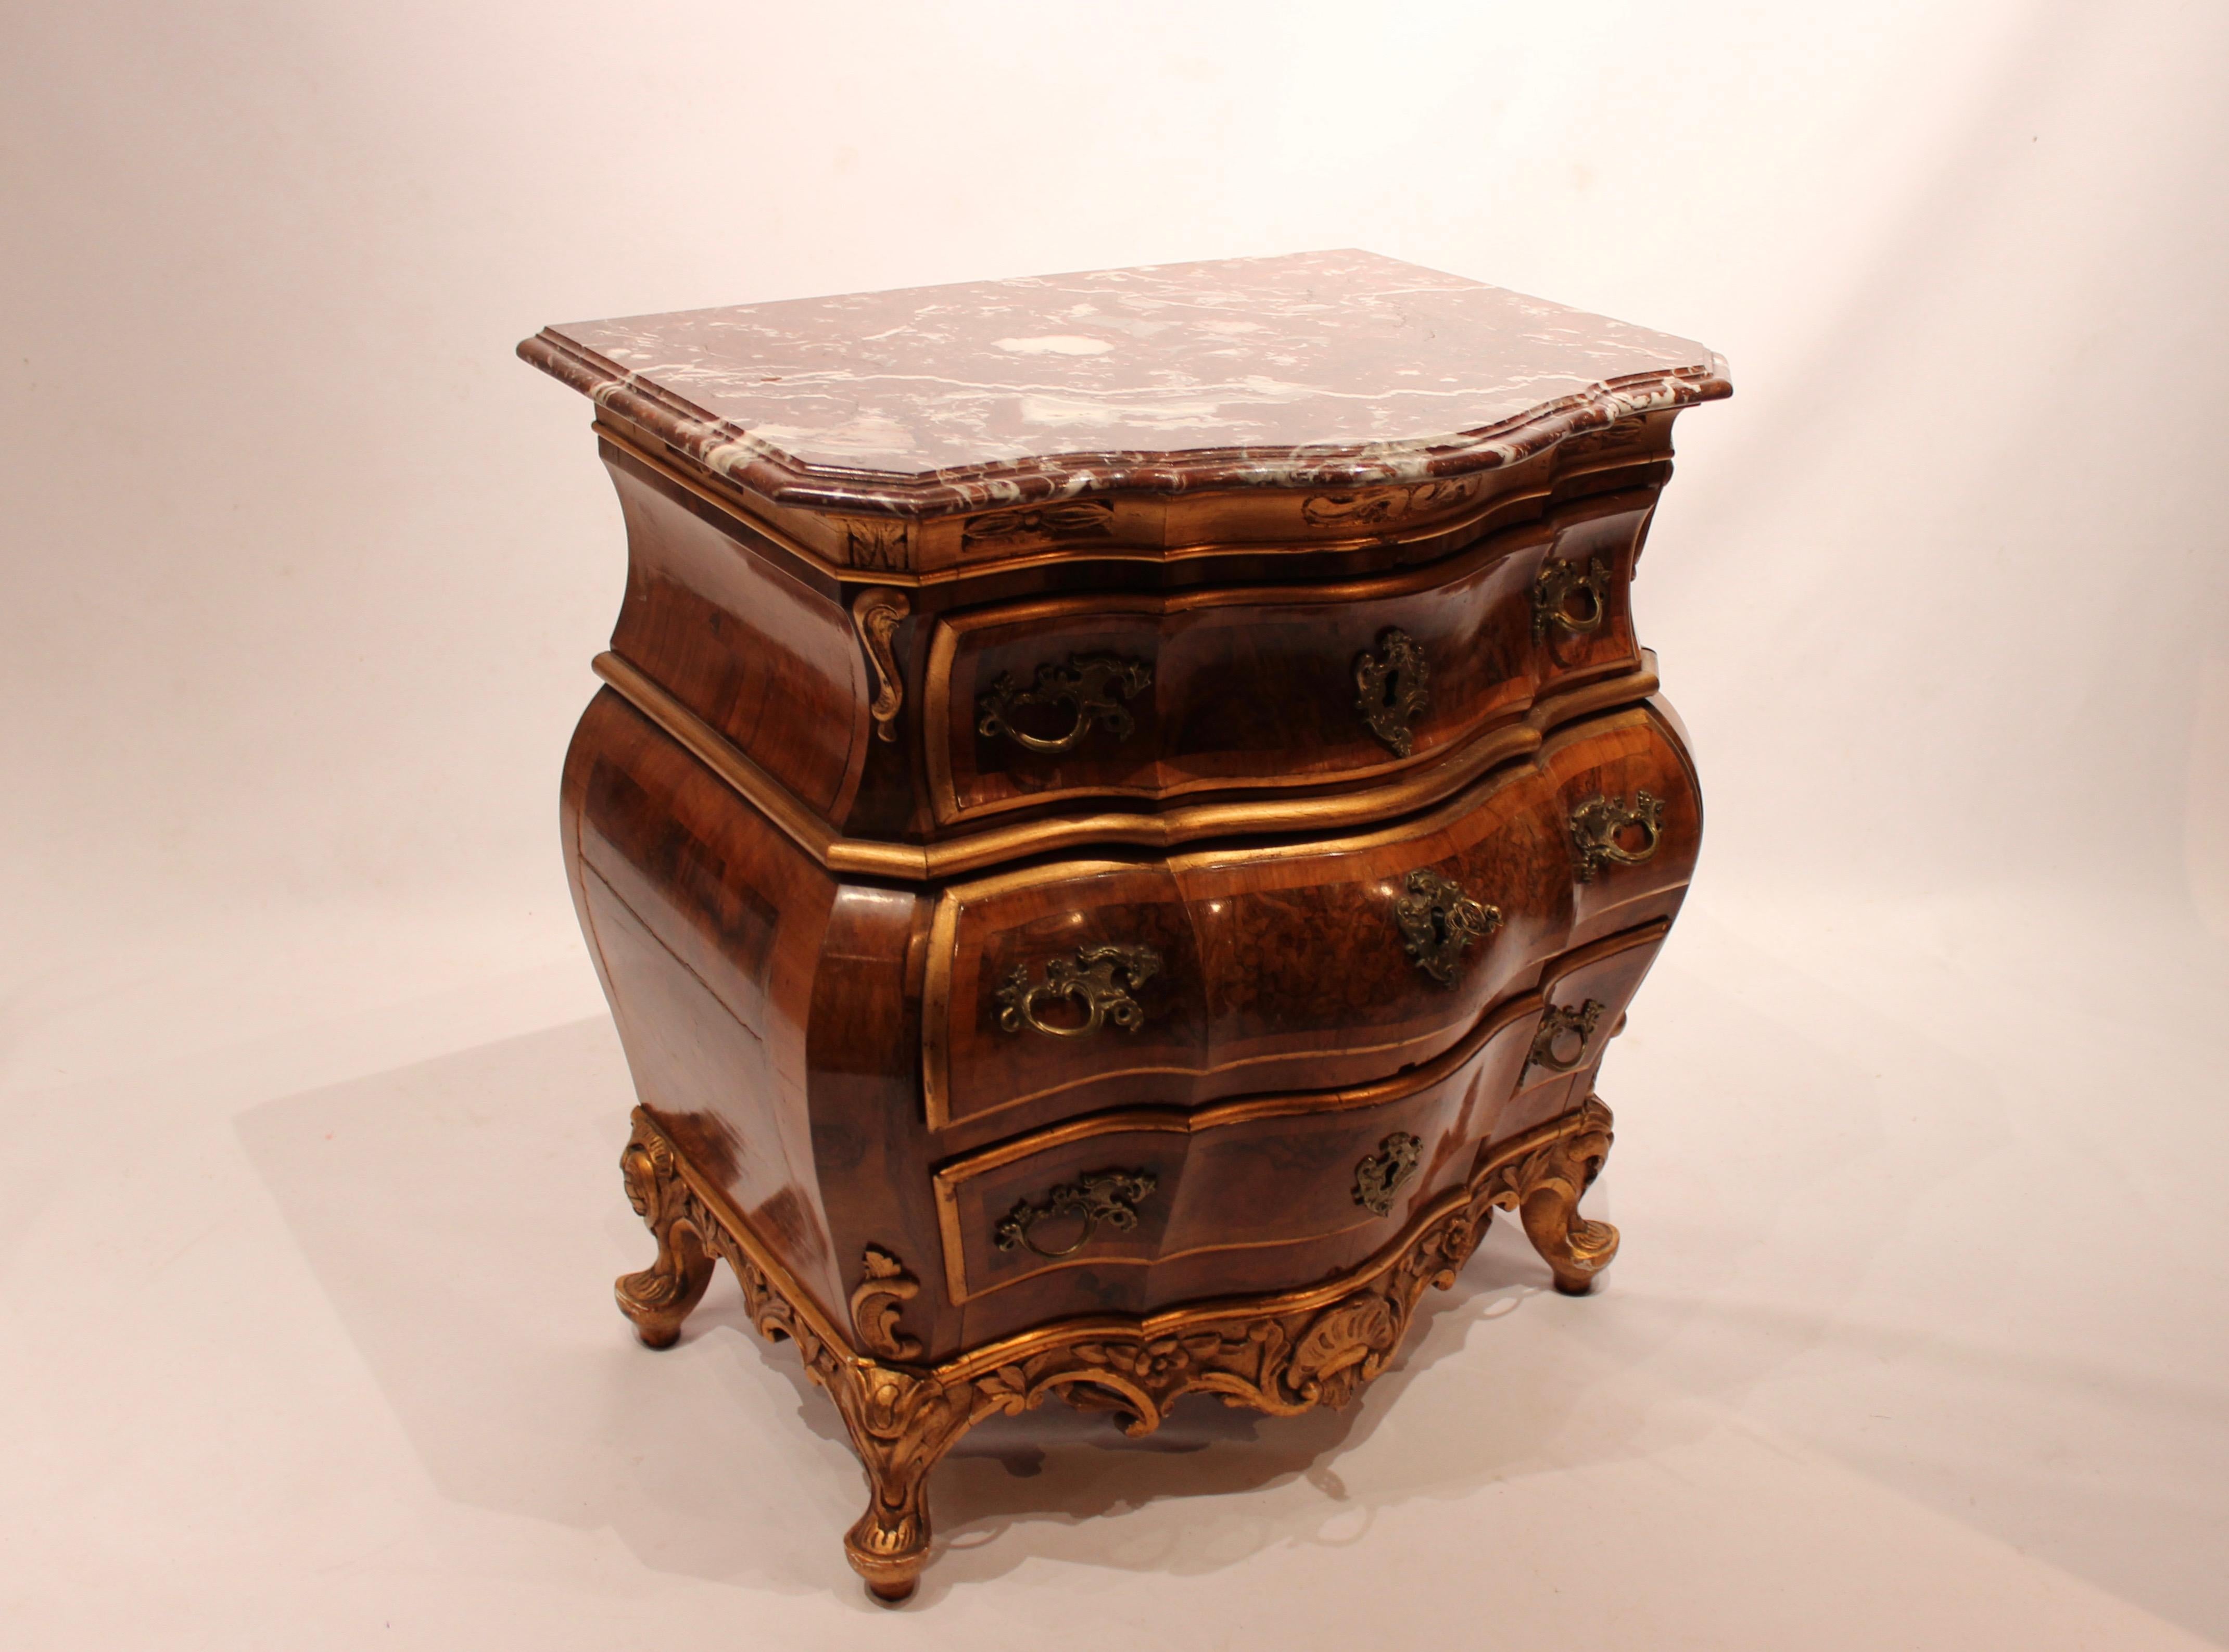 Chest of drawers of walnut with marble top plate from Denmark, circa 1880s. The chest is in great antique condition.